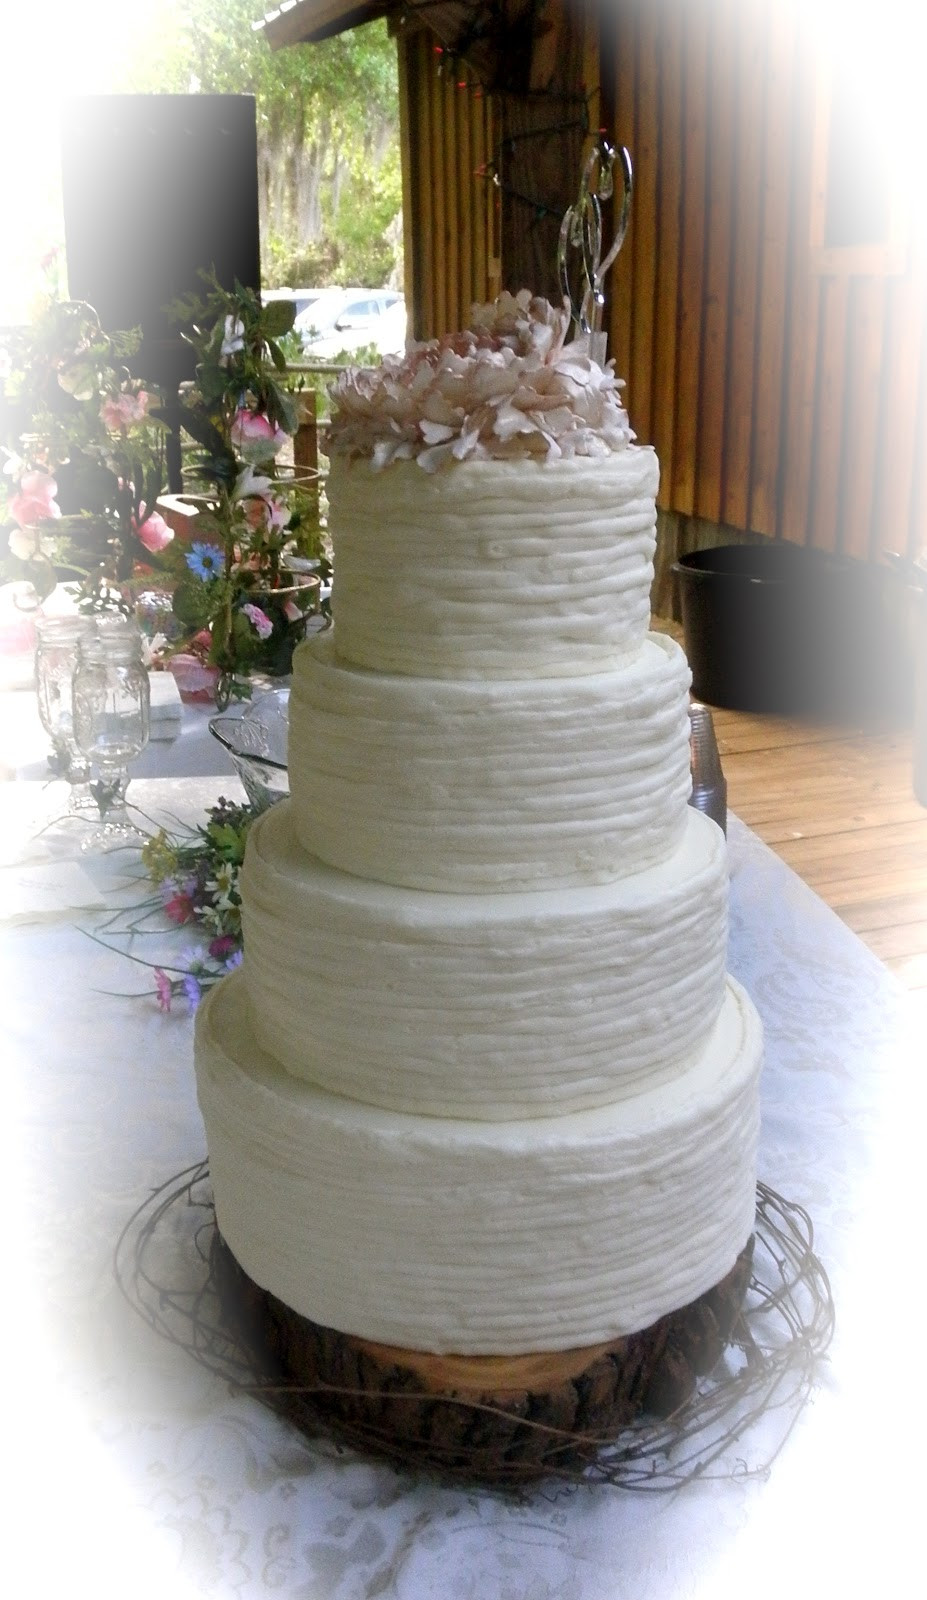 Rustic Chic Wedding Cakes
 Sweet T s Cake Design Shabby Chic Peony Rustic Wedding Cake